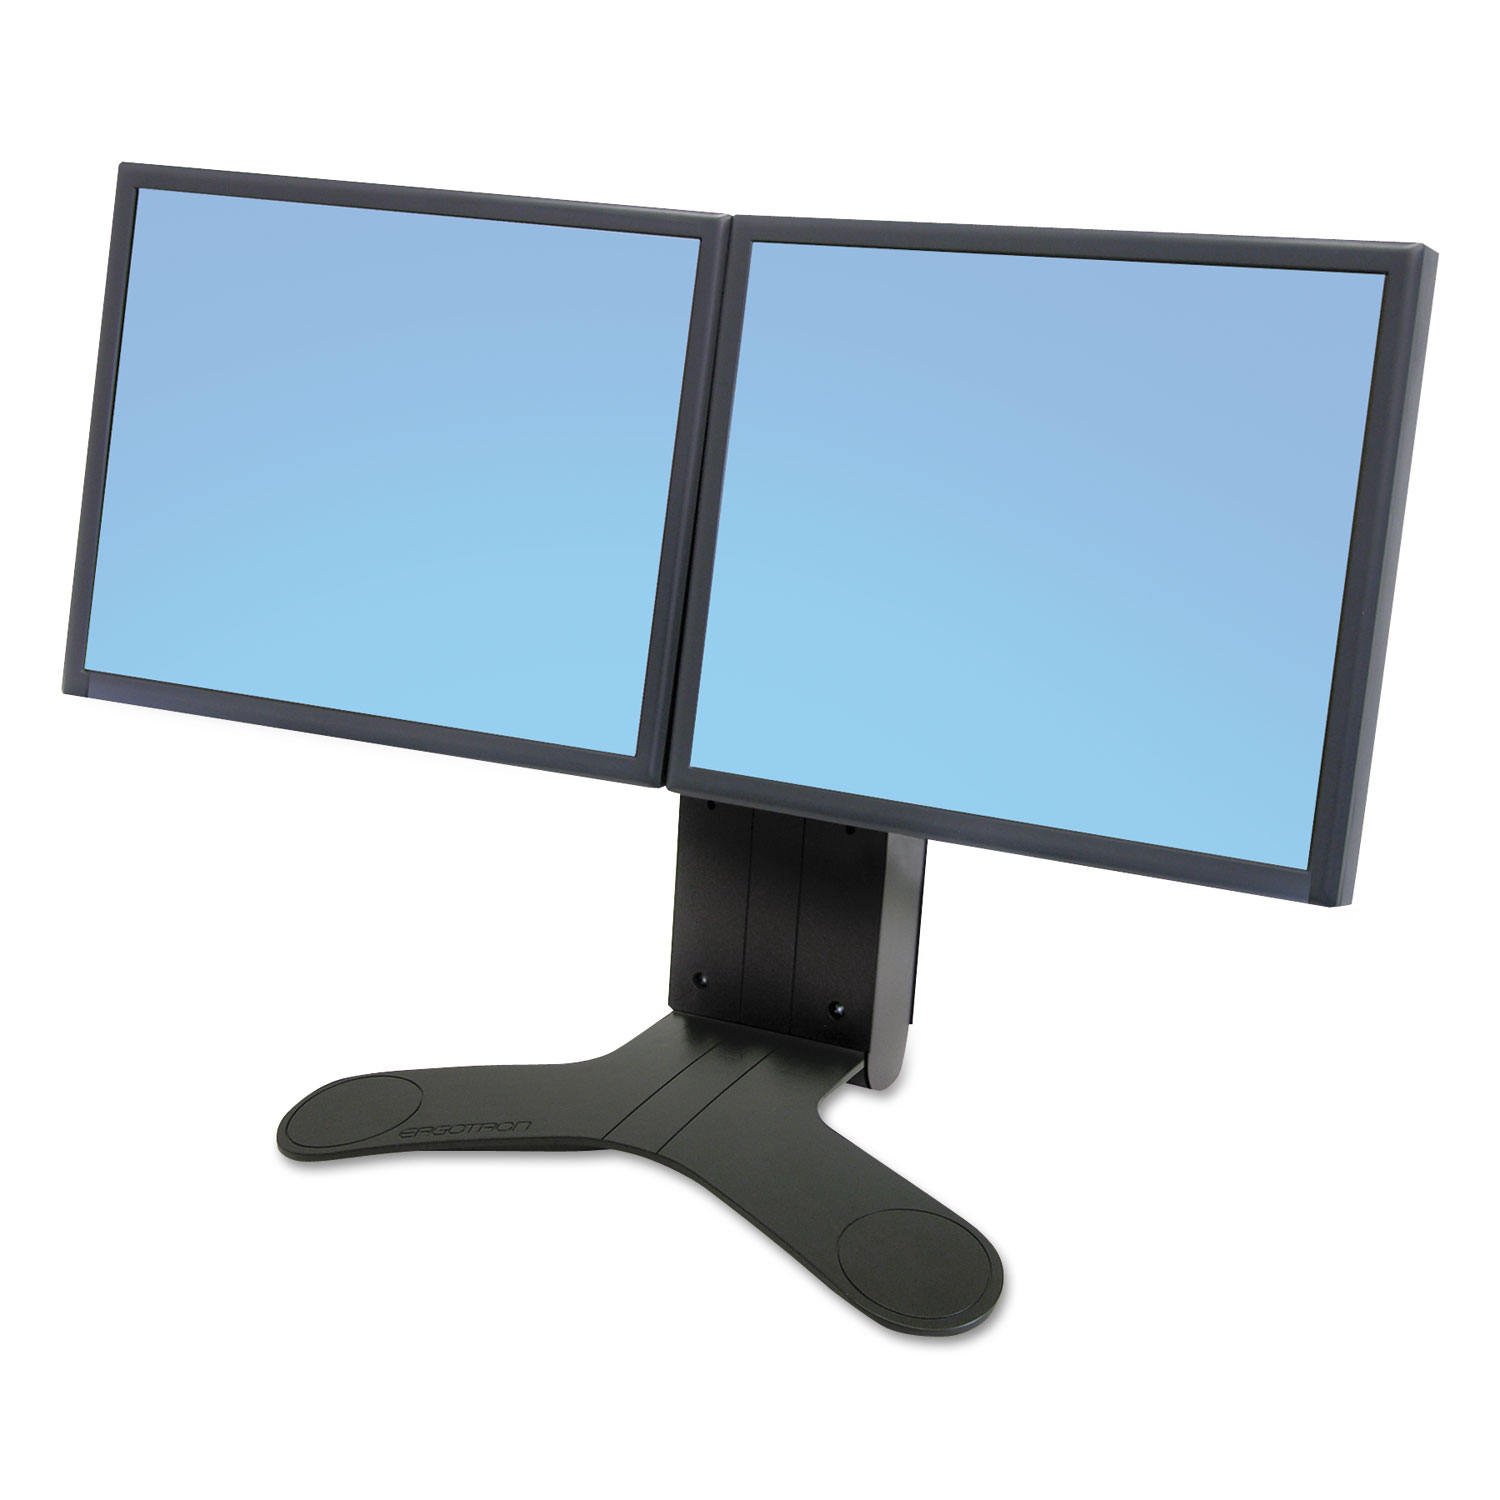  Ergotron 33-299-195 LX Display Lift Stand for Two LCD Screens, Black (ERG33299195) 